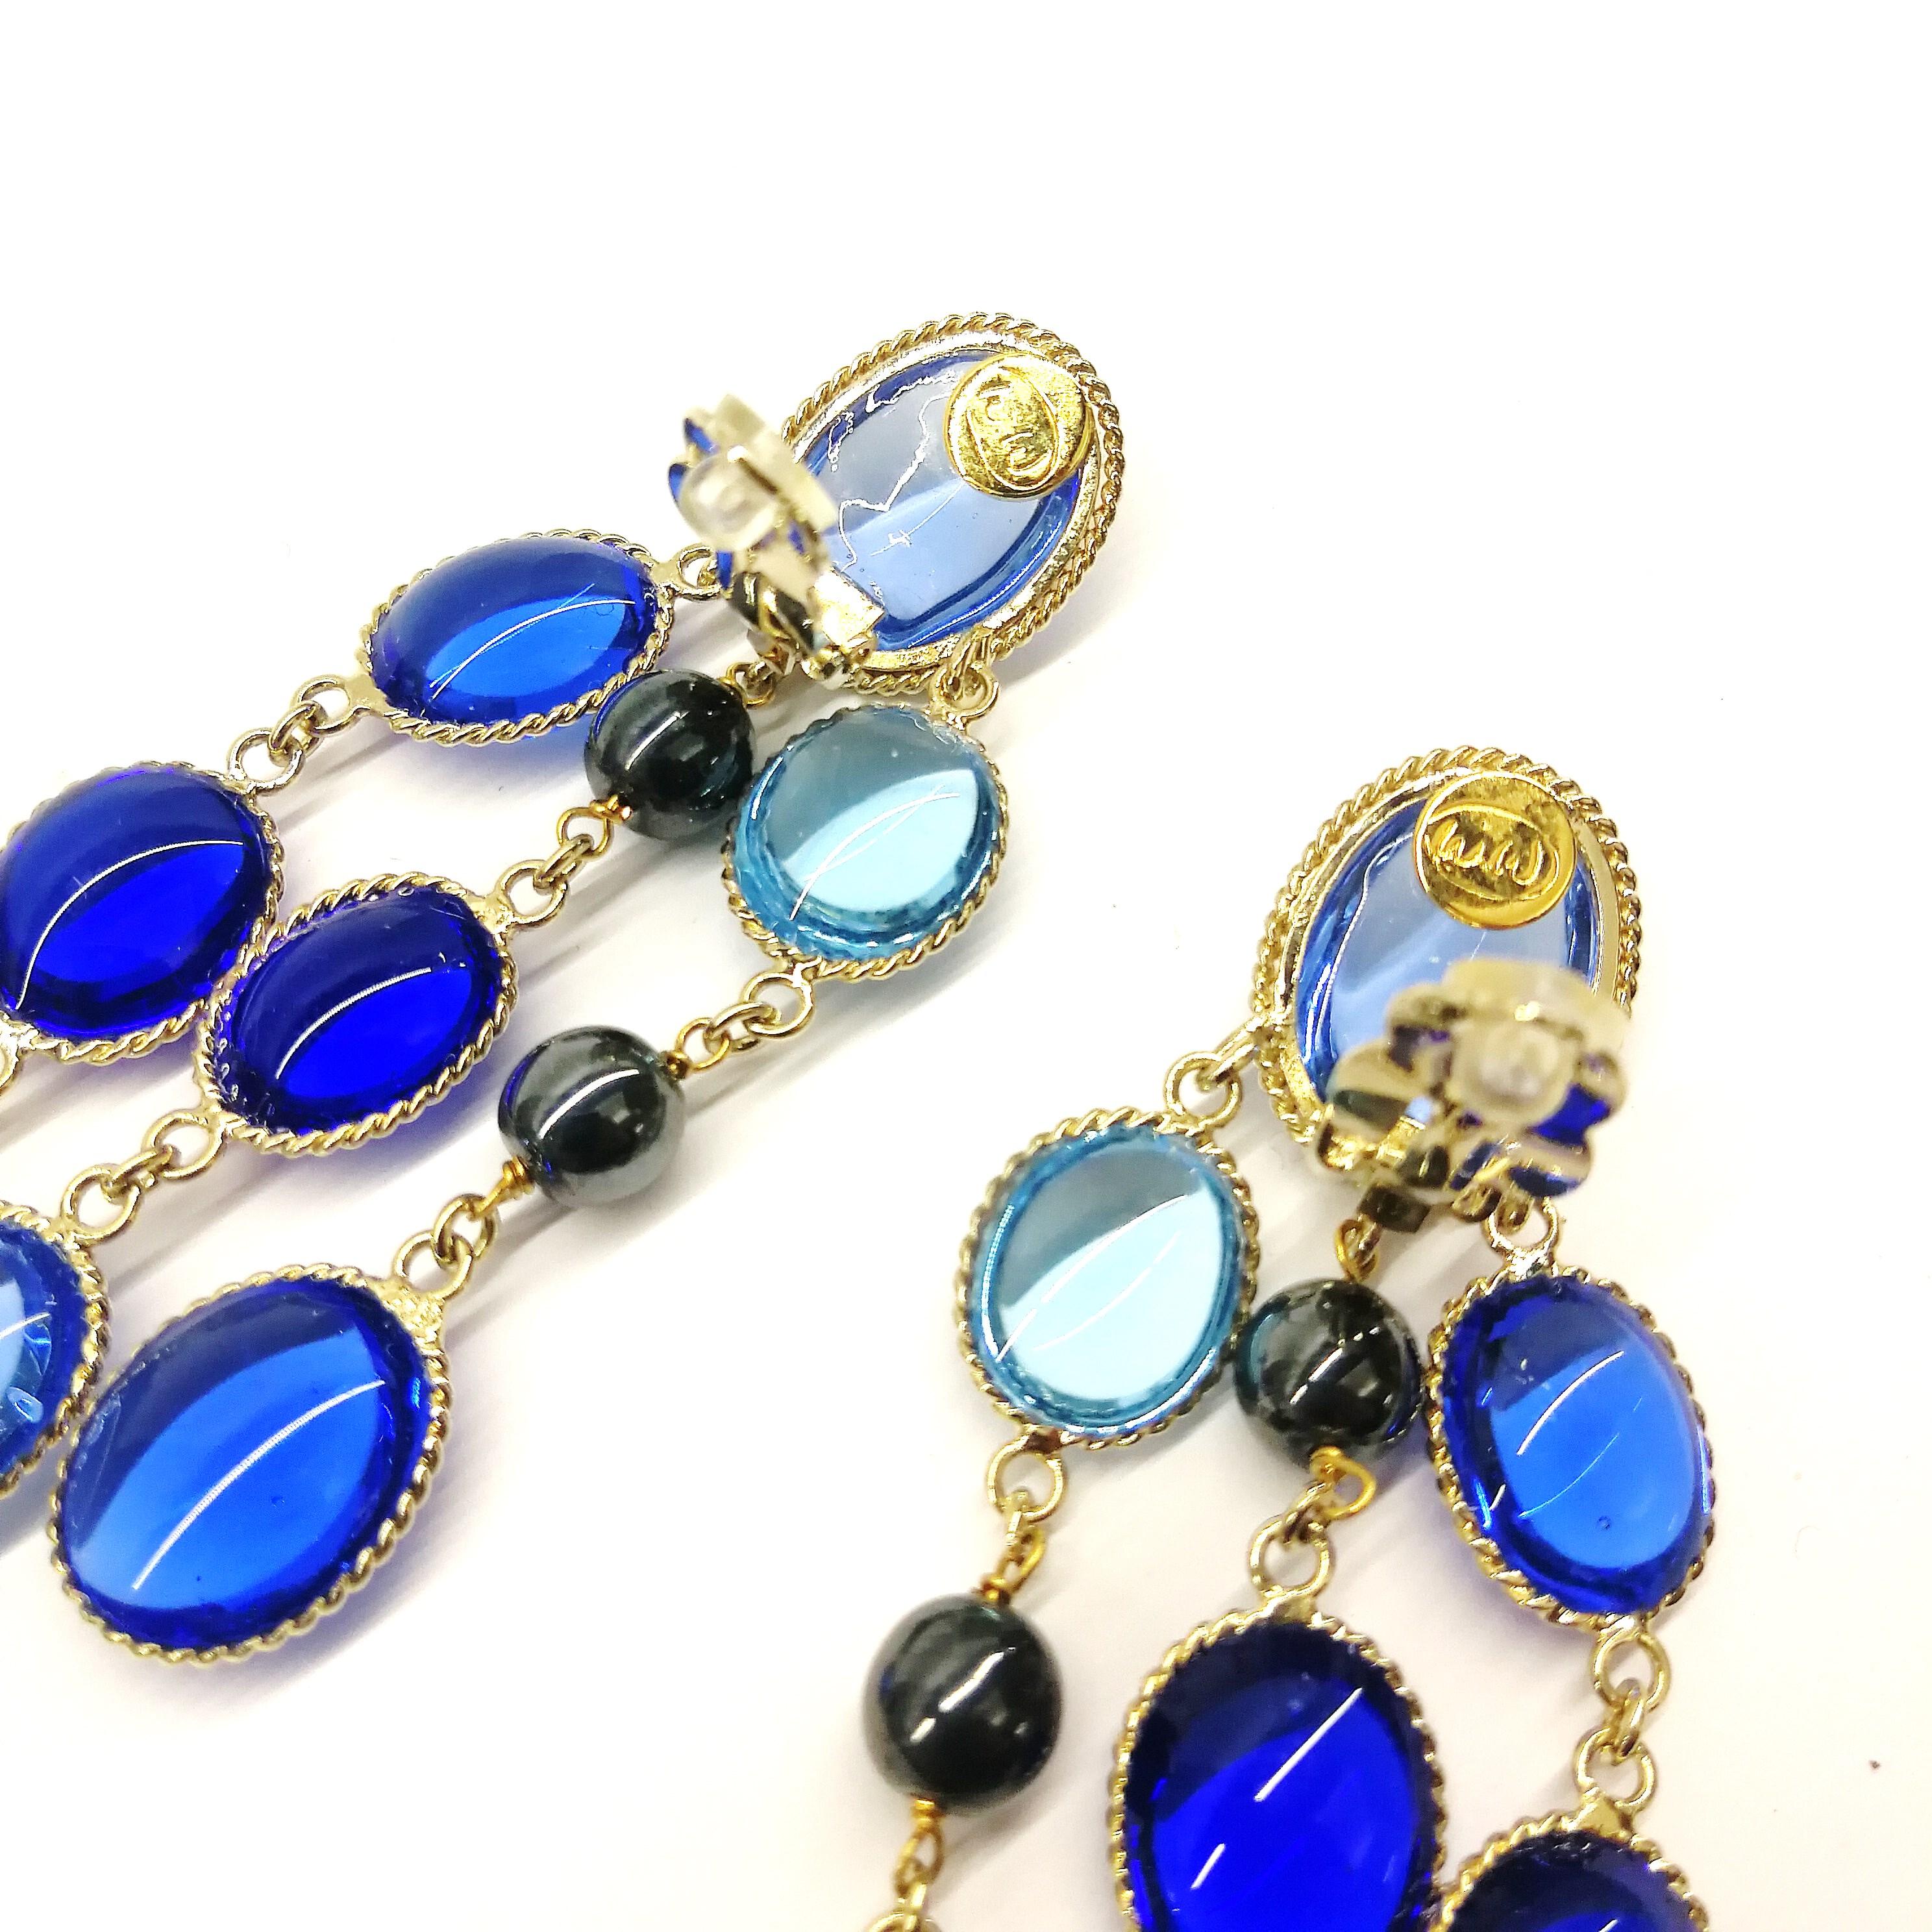 'WW; sapphire, light sapphire poured glass, and pearl 3 row drop earrings, 2018 For Sale 4